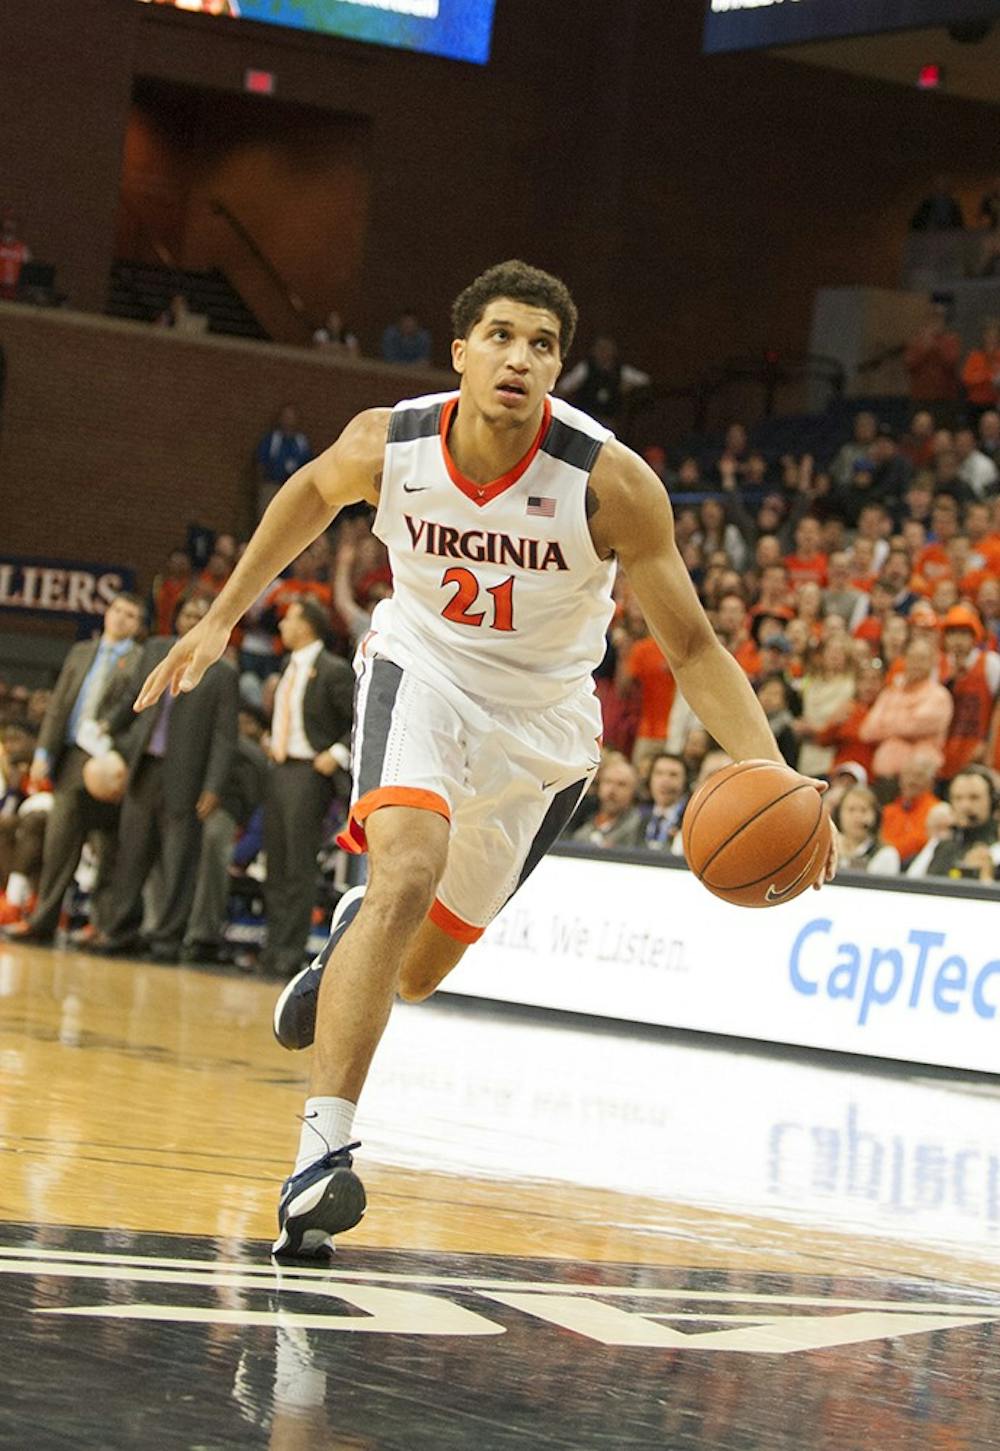 <p>Since earning his way back into the starting five Jan. 30, sophomore forward Isaiah Wilkins has owned his workmanlike role for Virginia. Tuesday night, Wilkins should be tasked with guarding Virginia Tech's versatile forward Zach LeDay.&nbsp; </p>